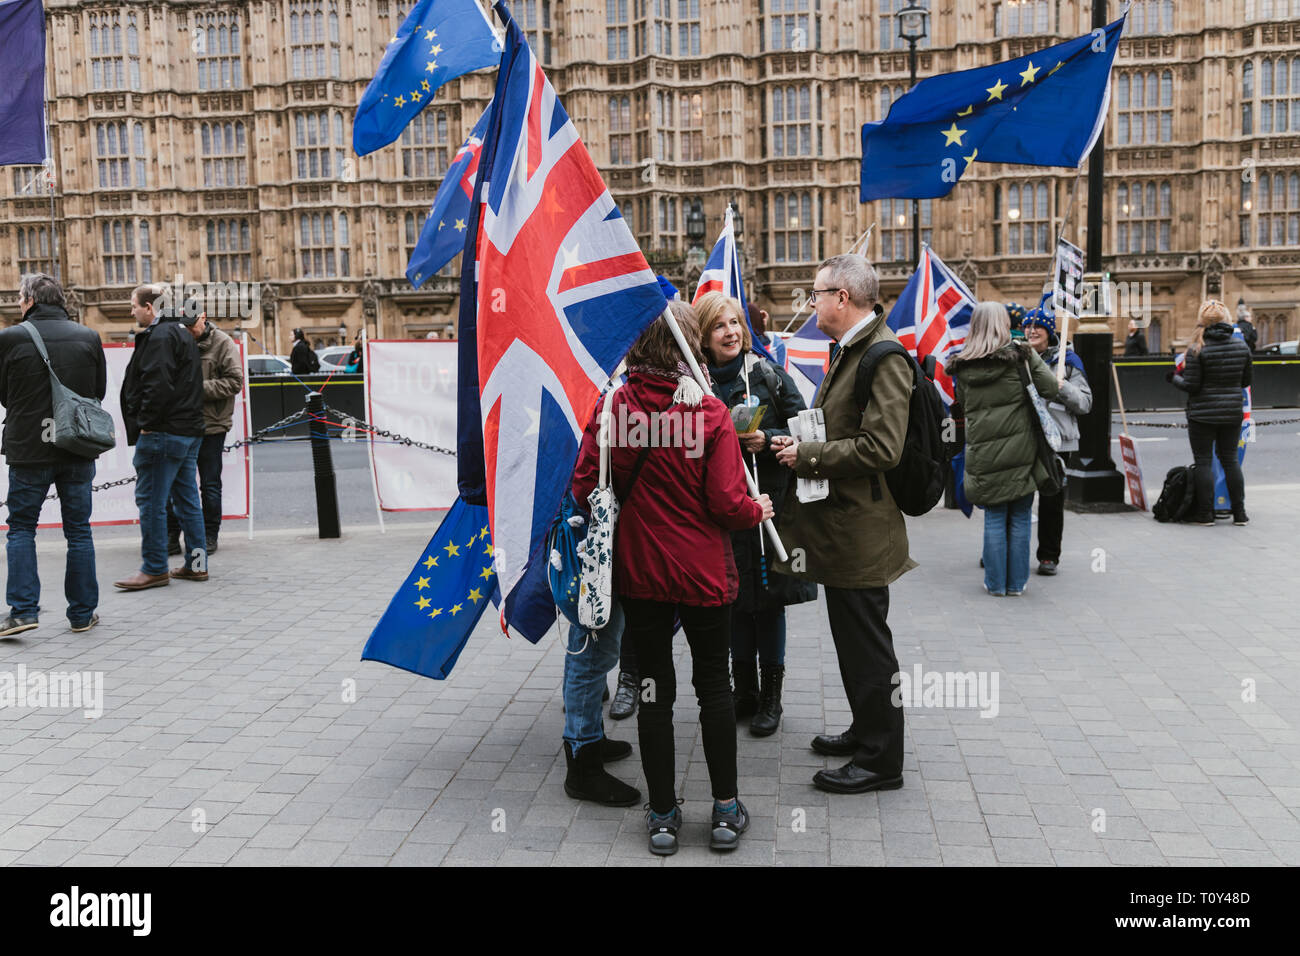 LONDON - MARCH 20, 2019: People signs and flag at Brexit protest in Westminster London Stock Photo